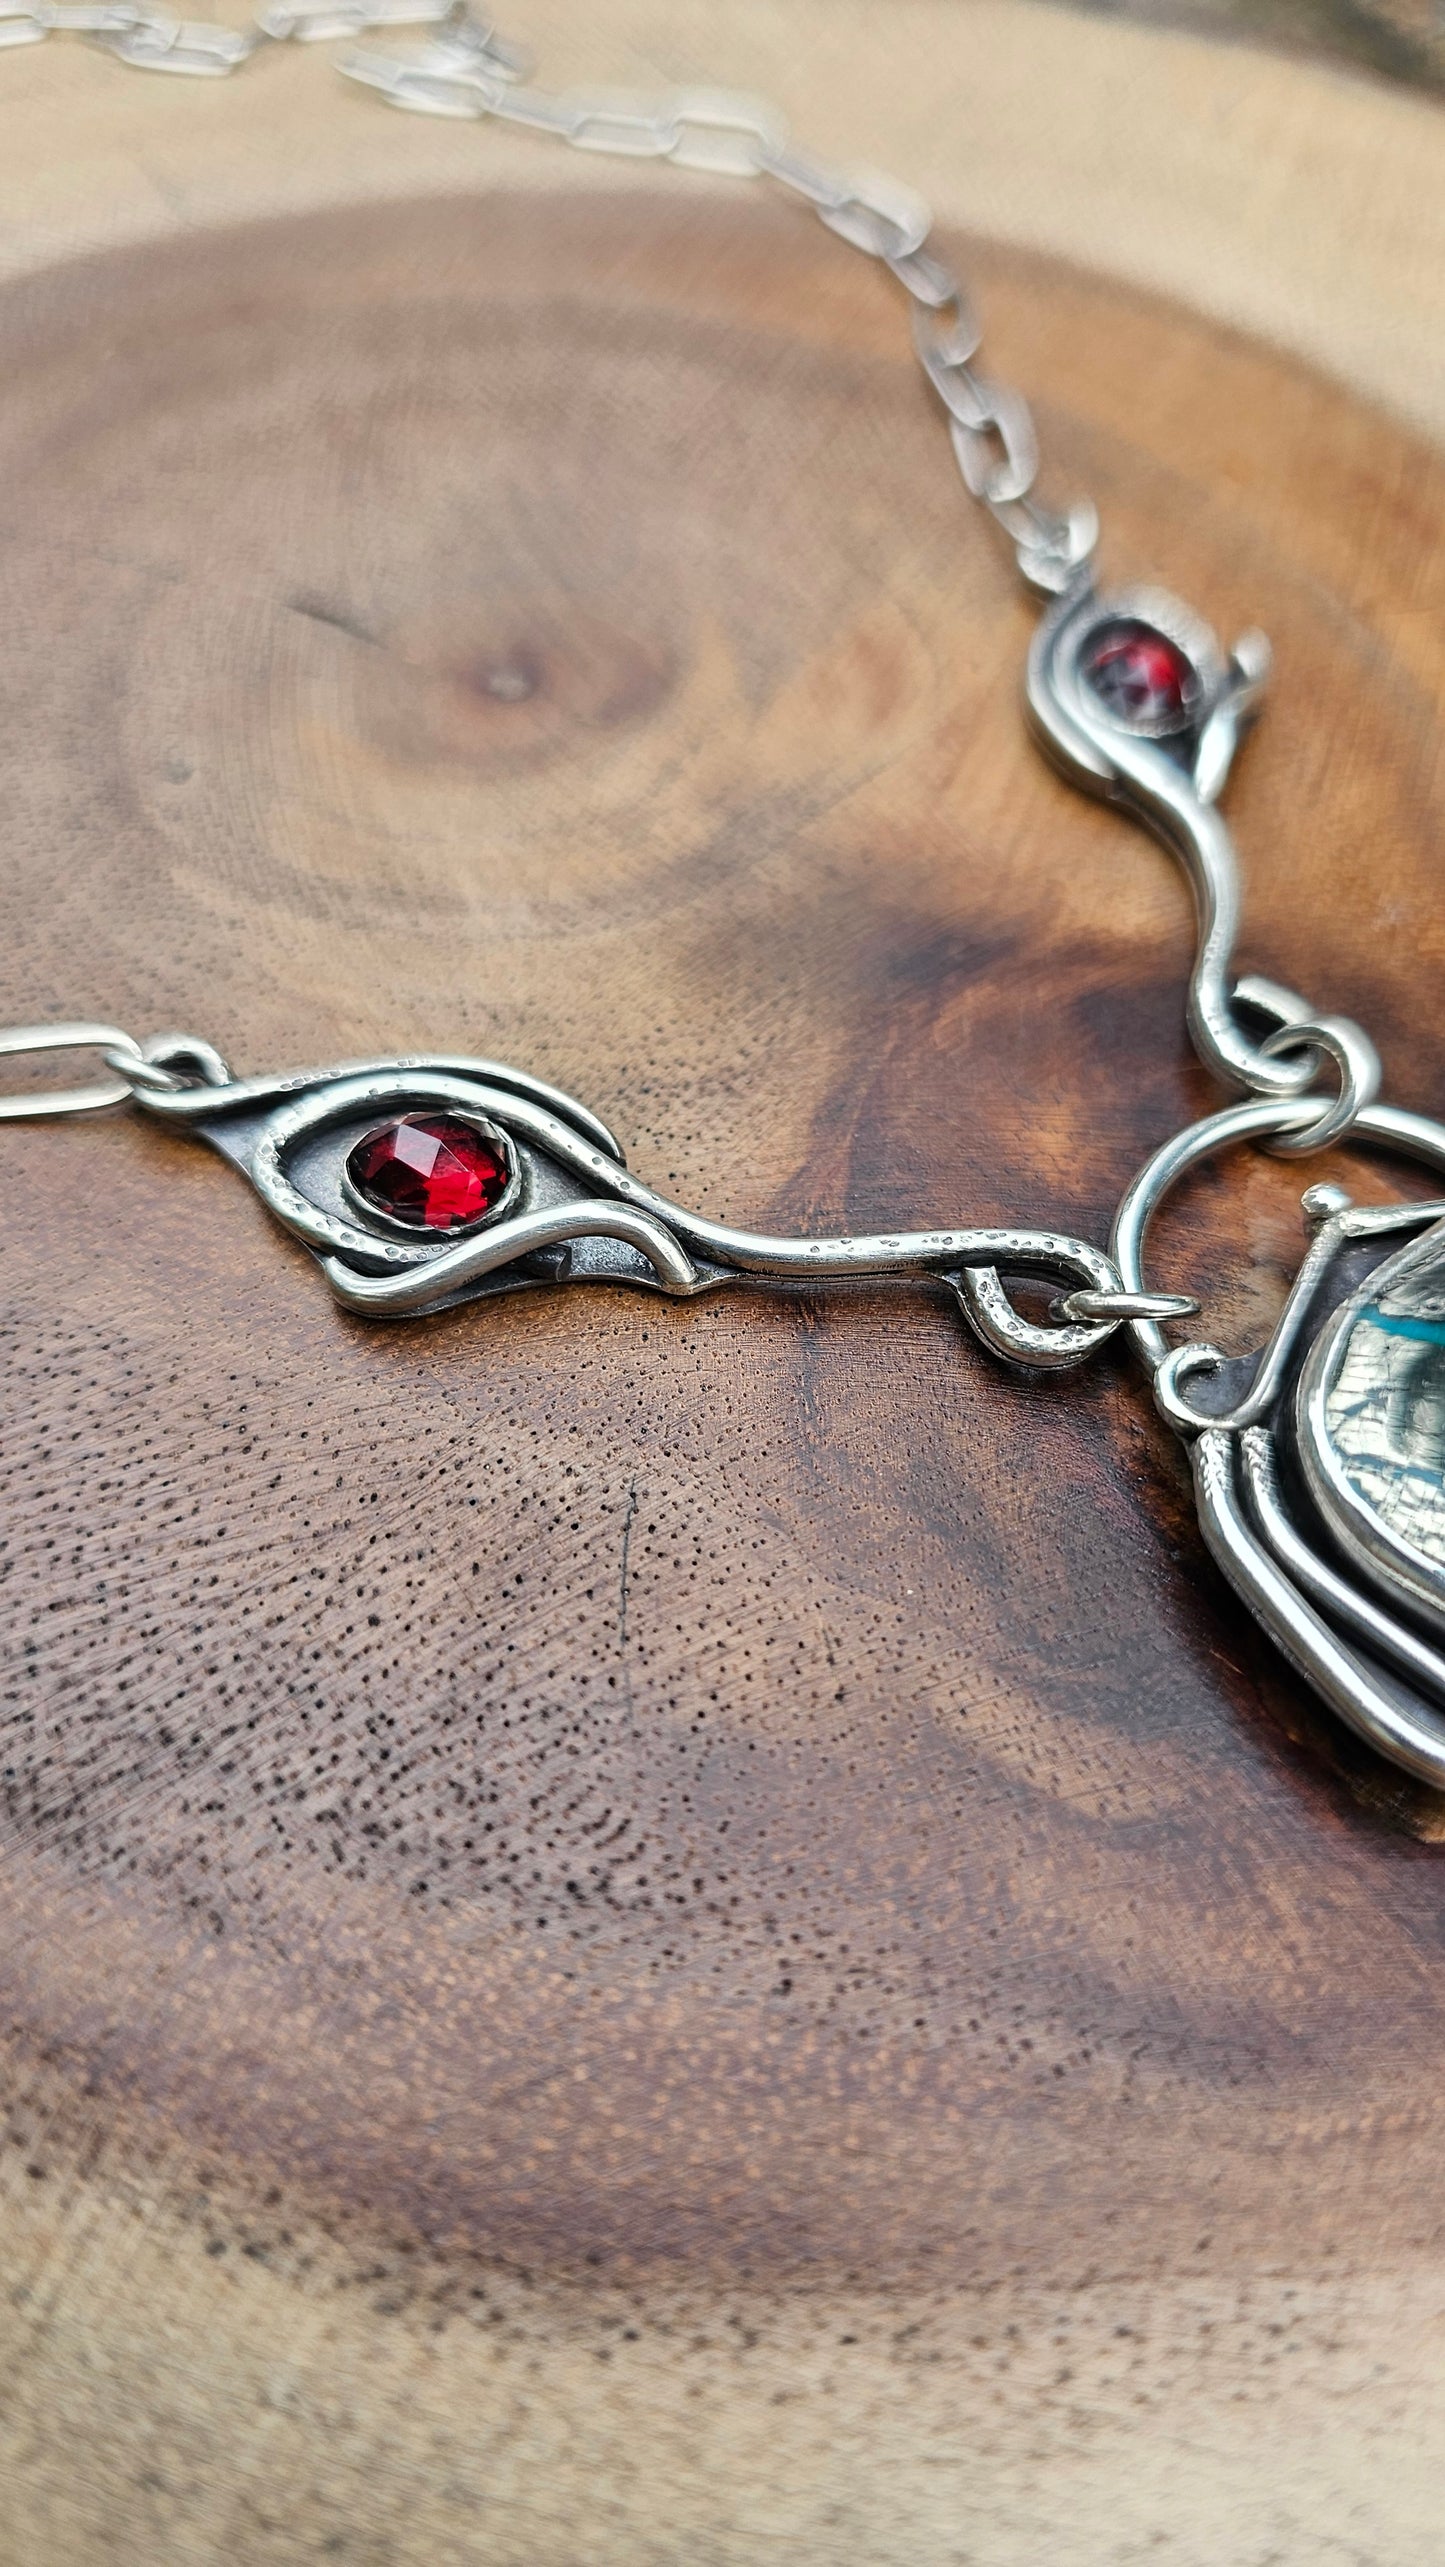 x A WOLF TEMPLE Talisman Statement Necklace - Nacozari Turquoise with Garnet in Fine and Sterling Silver